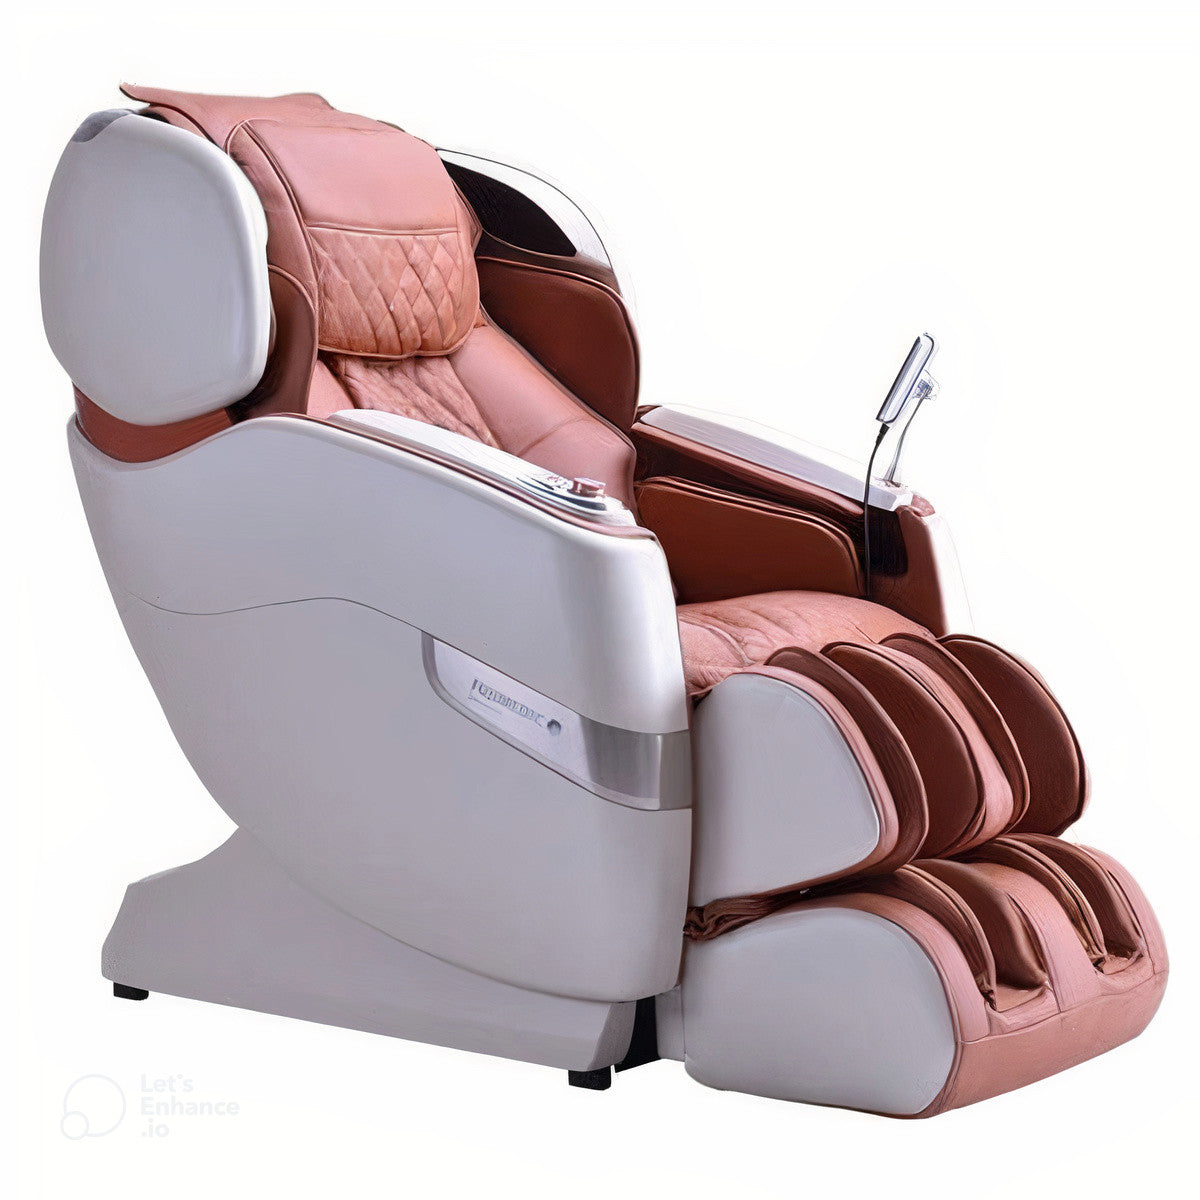 The JPMedics Kumo is a Japanese Massage Chair that offers a luxurious massage experience with heated knee therapy and 4D rollers.